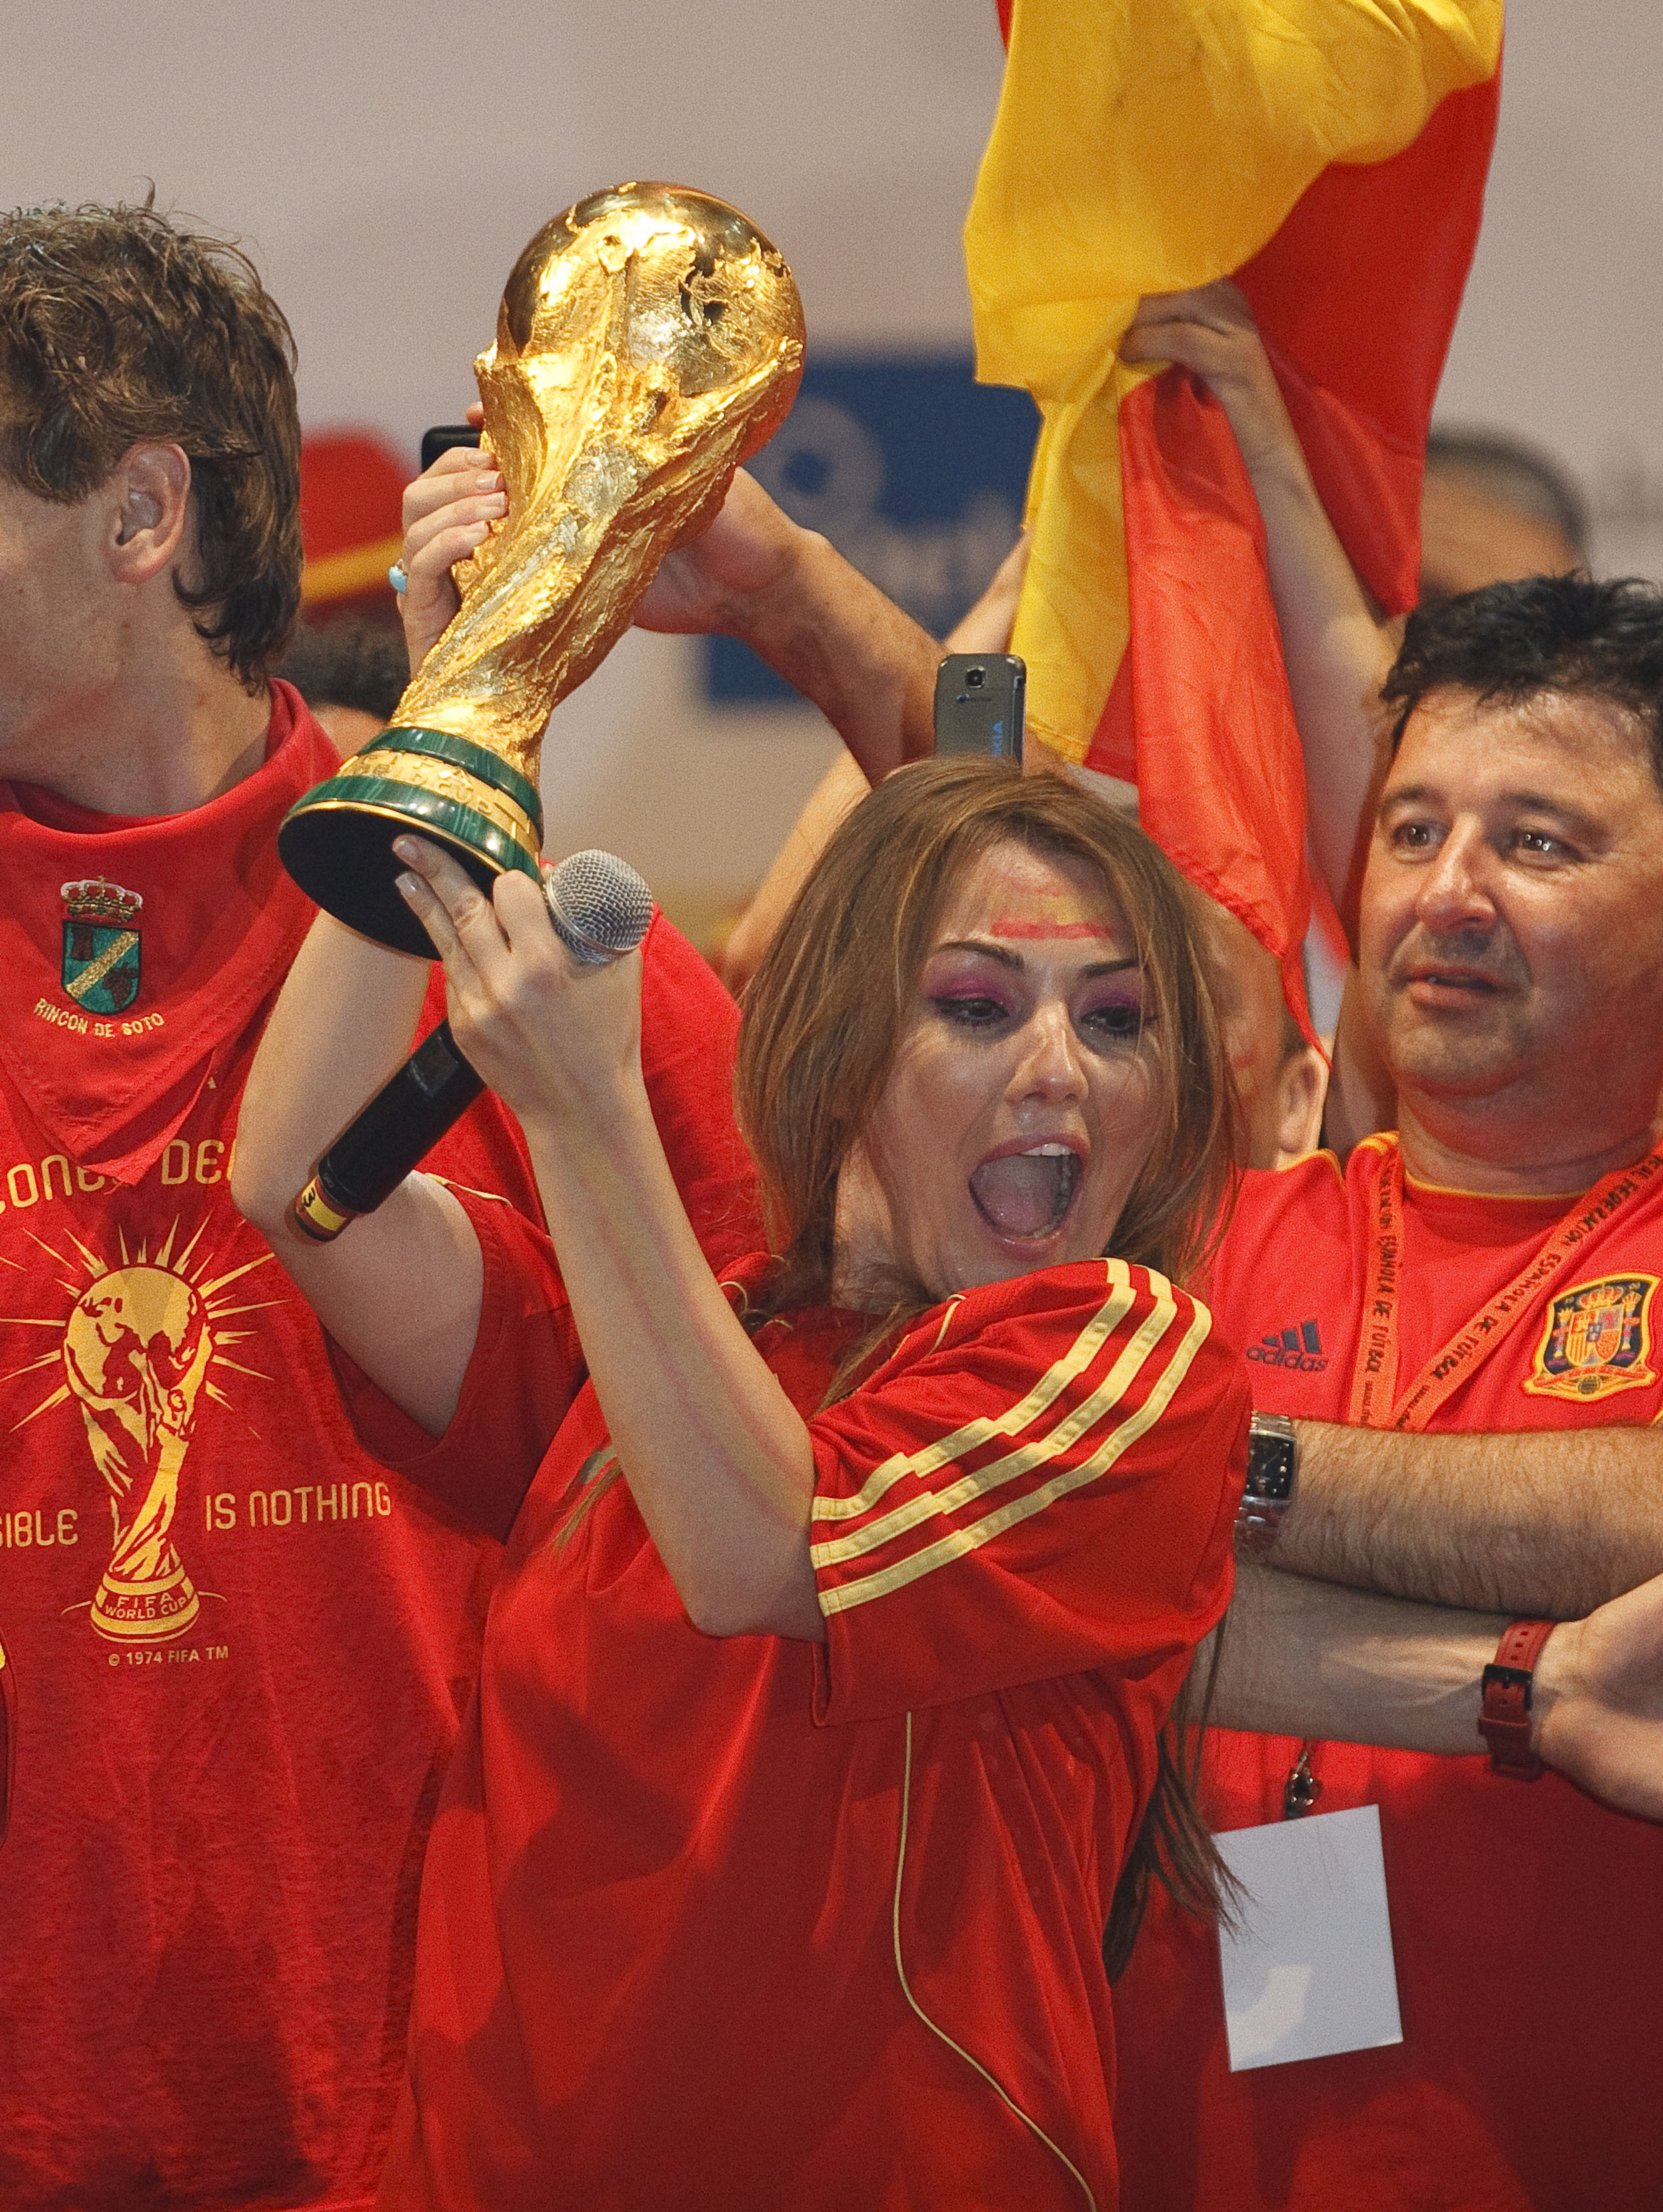 MADRID, SPAIN - JULY 12:  MADRID, SPAIN - JULY 12: Spanish singer Amaia Montero with the trophy on a stage set up for the Spanish team victory ceremony on July 12, 2010 in Madrid, Spain. Spain won the 2010 FIFA football World Cup match against the Netherl